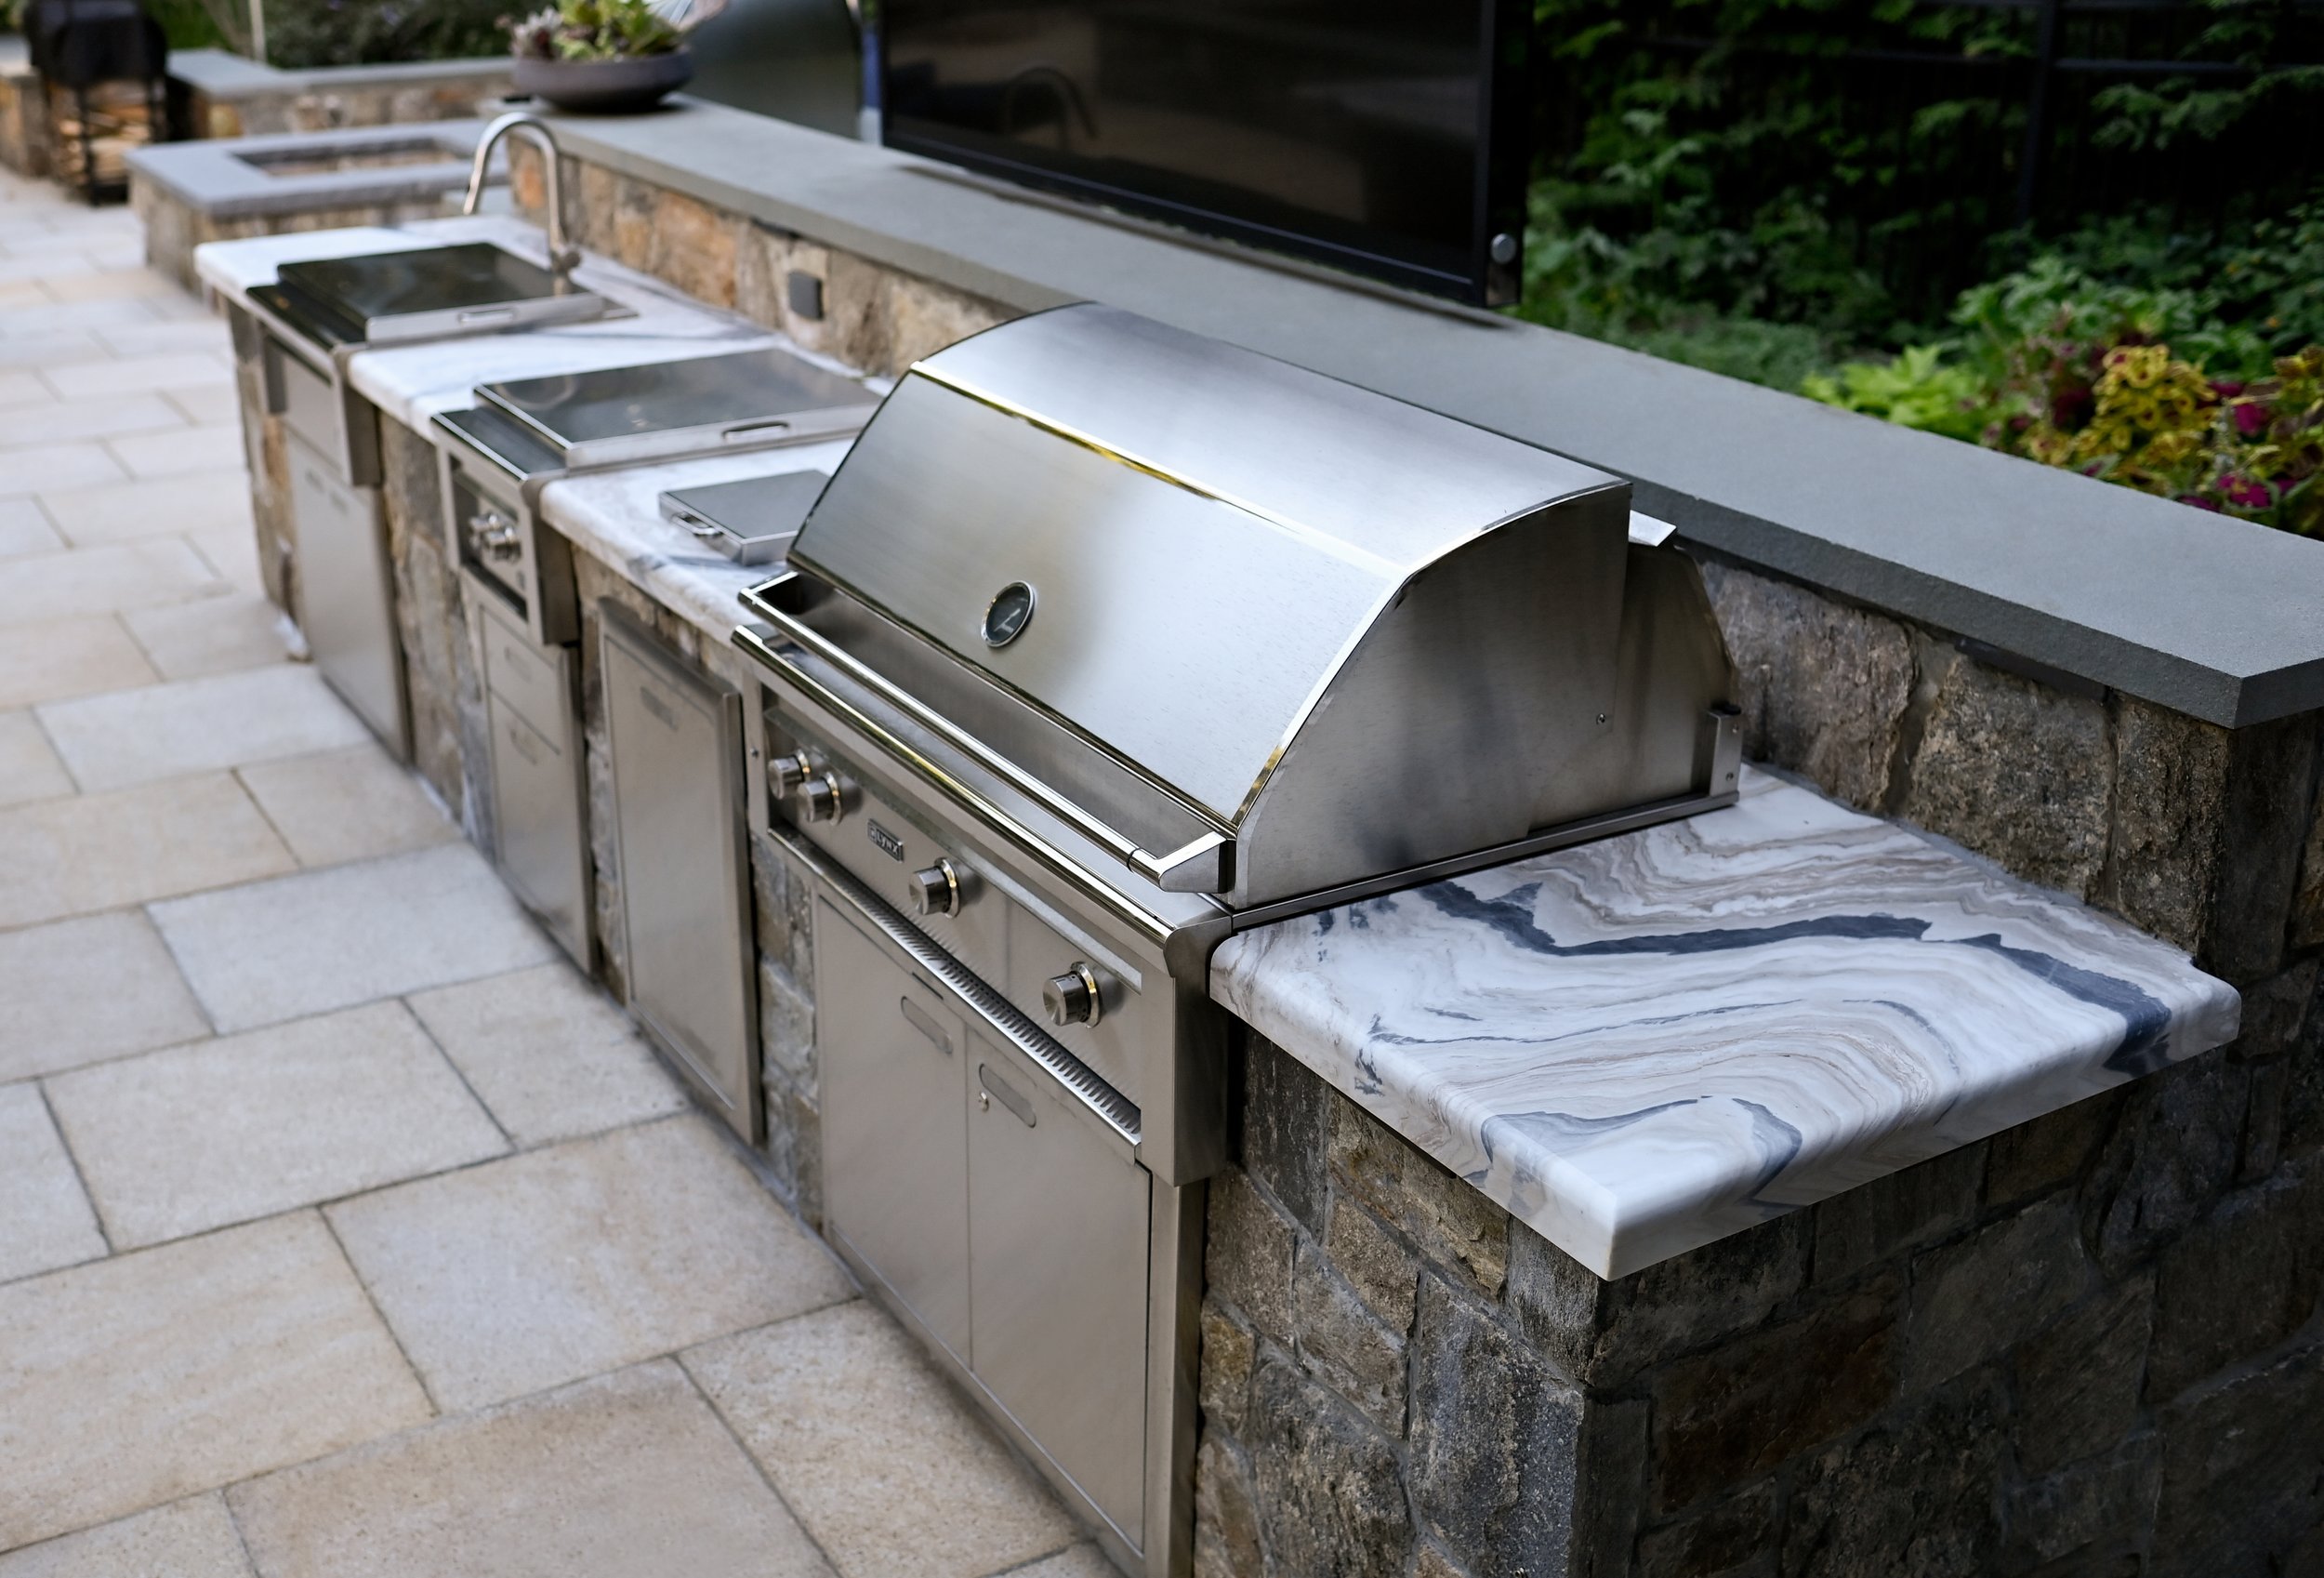 Gault Stone_Shelton_May Flower Lane_Outdoor Kitchen_Grill_Angle_CWE2195.jpg